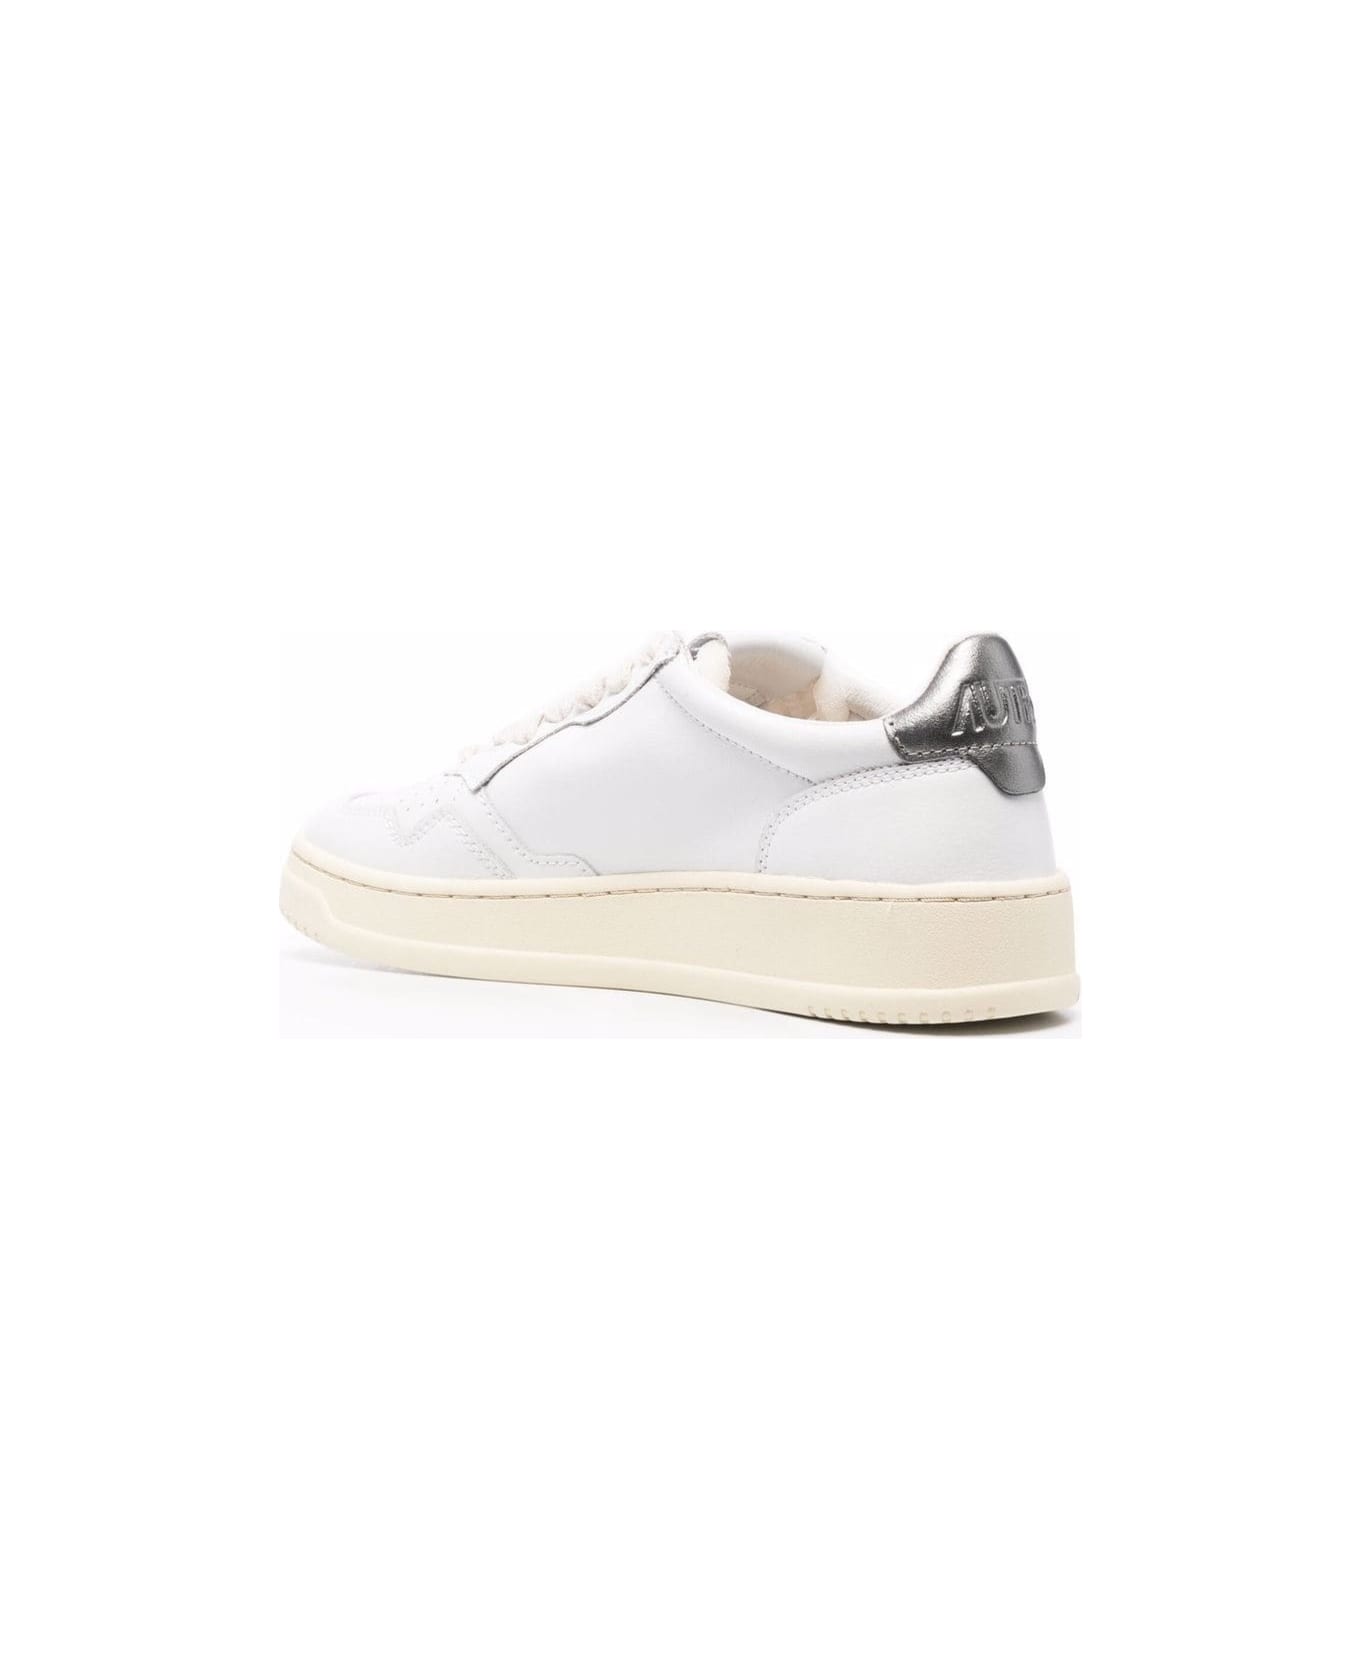 Autry White And Silver Leather Sneakers Autry Woman - Bianco/Argento スニーカー